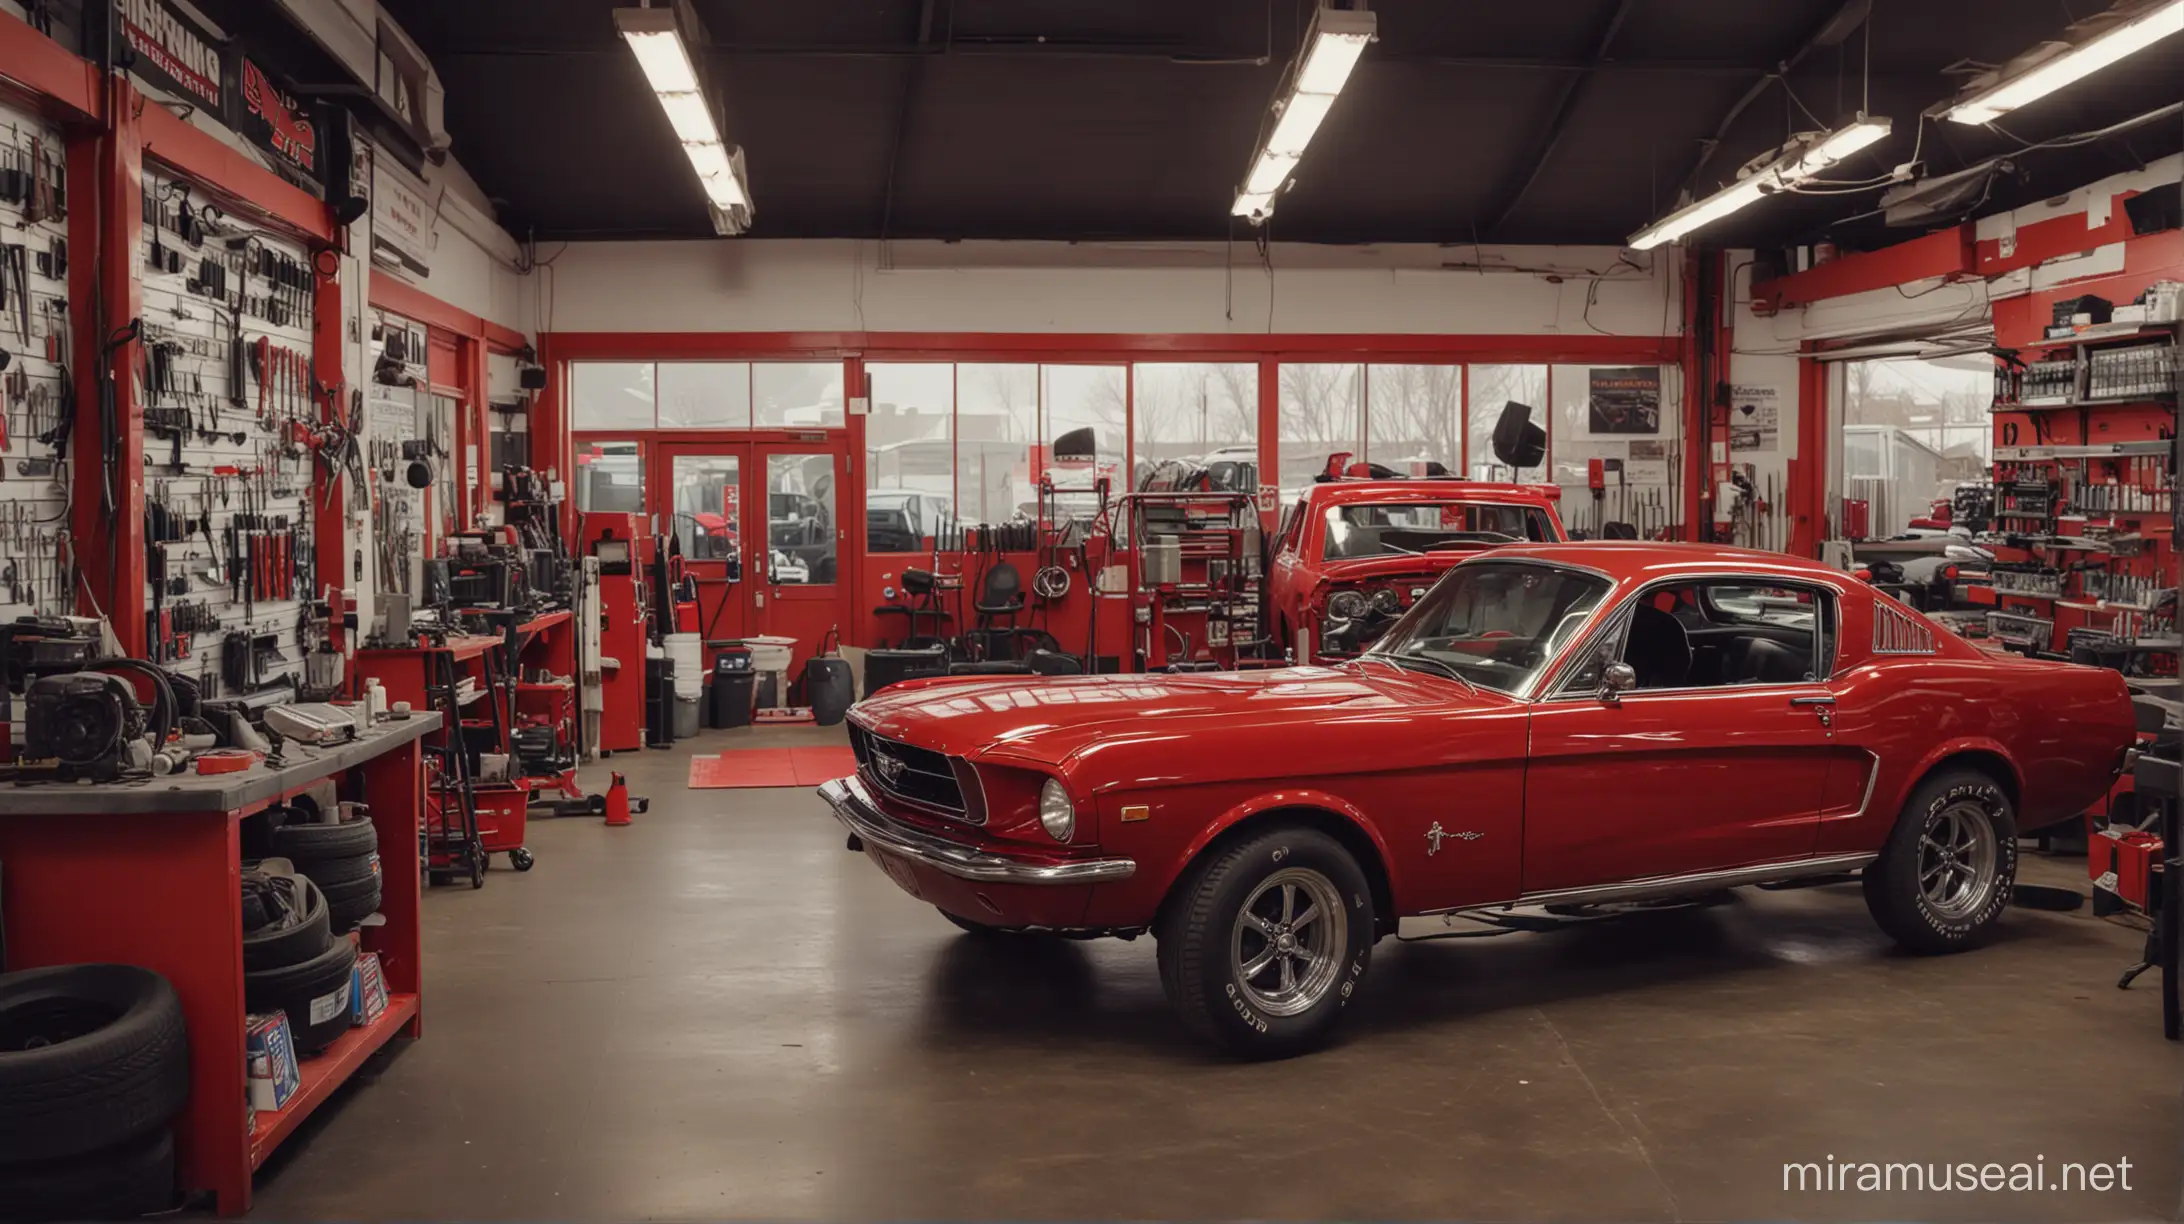 An image of the interior of a car repair shop with a red theme
A mustang car is in the picture
The name of this repair shop is poorya autorepair
